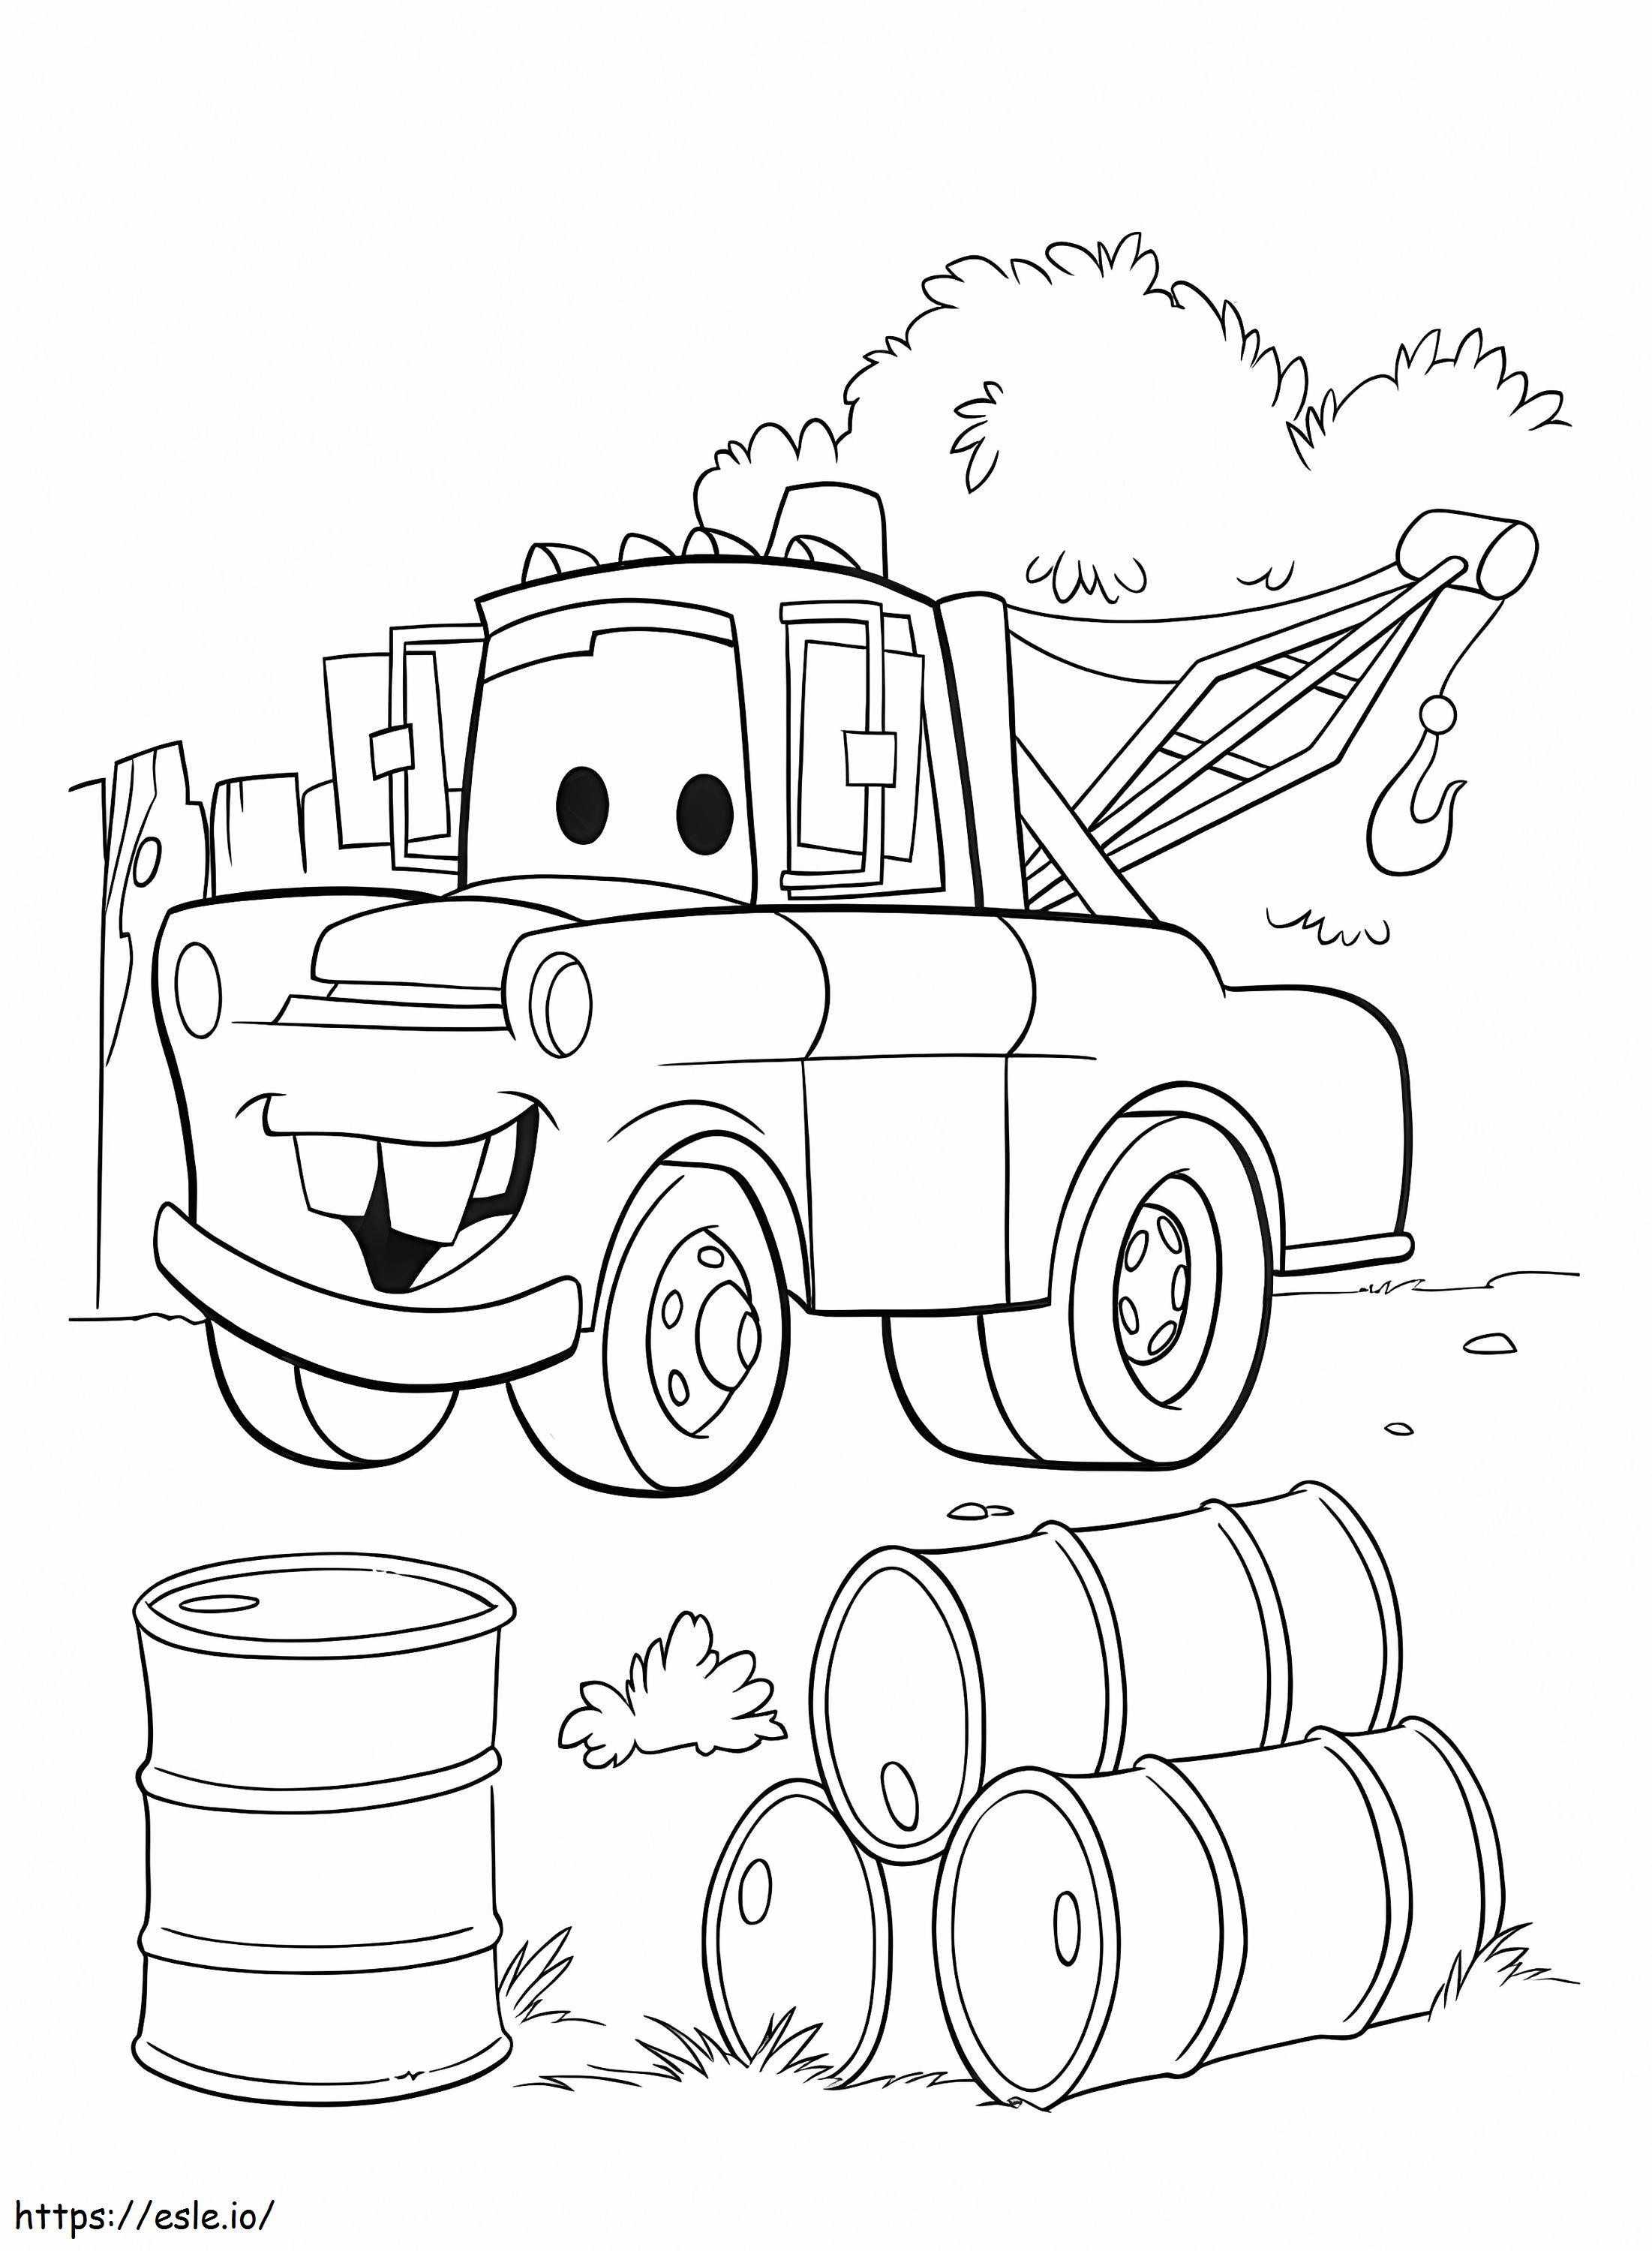 Free Printable Tow Mater coloring page